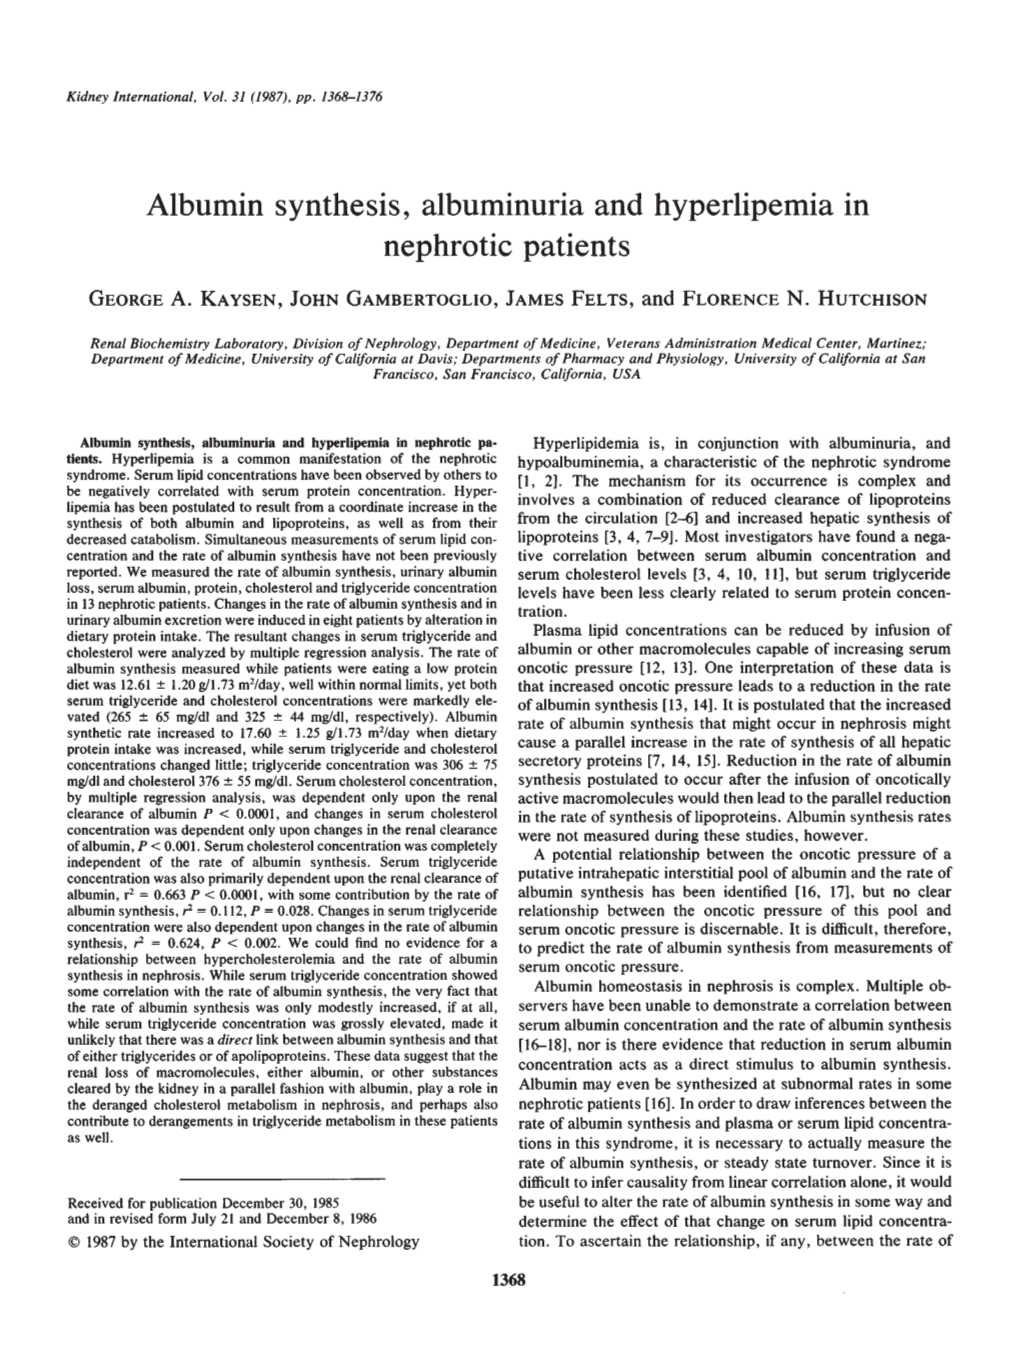 Albumin Synthesis, Albuminuria and Hyperlipemia in Nephrotic Patients